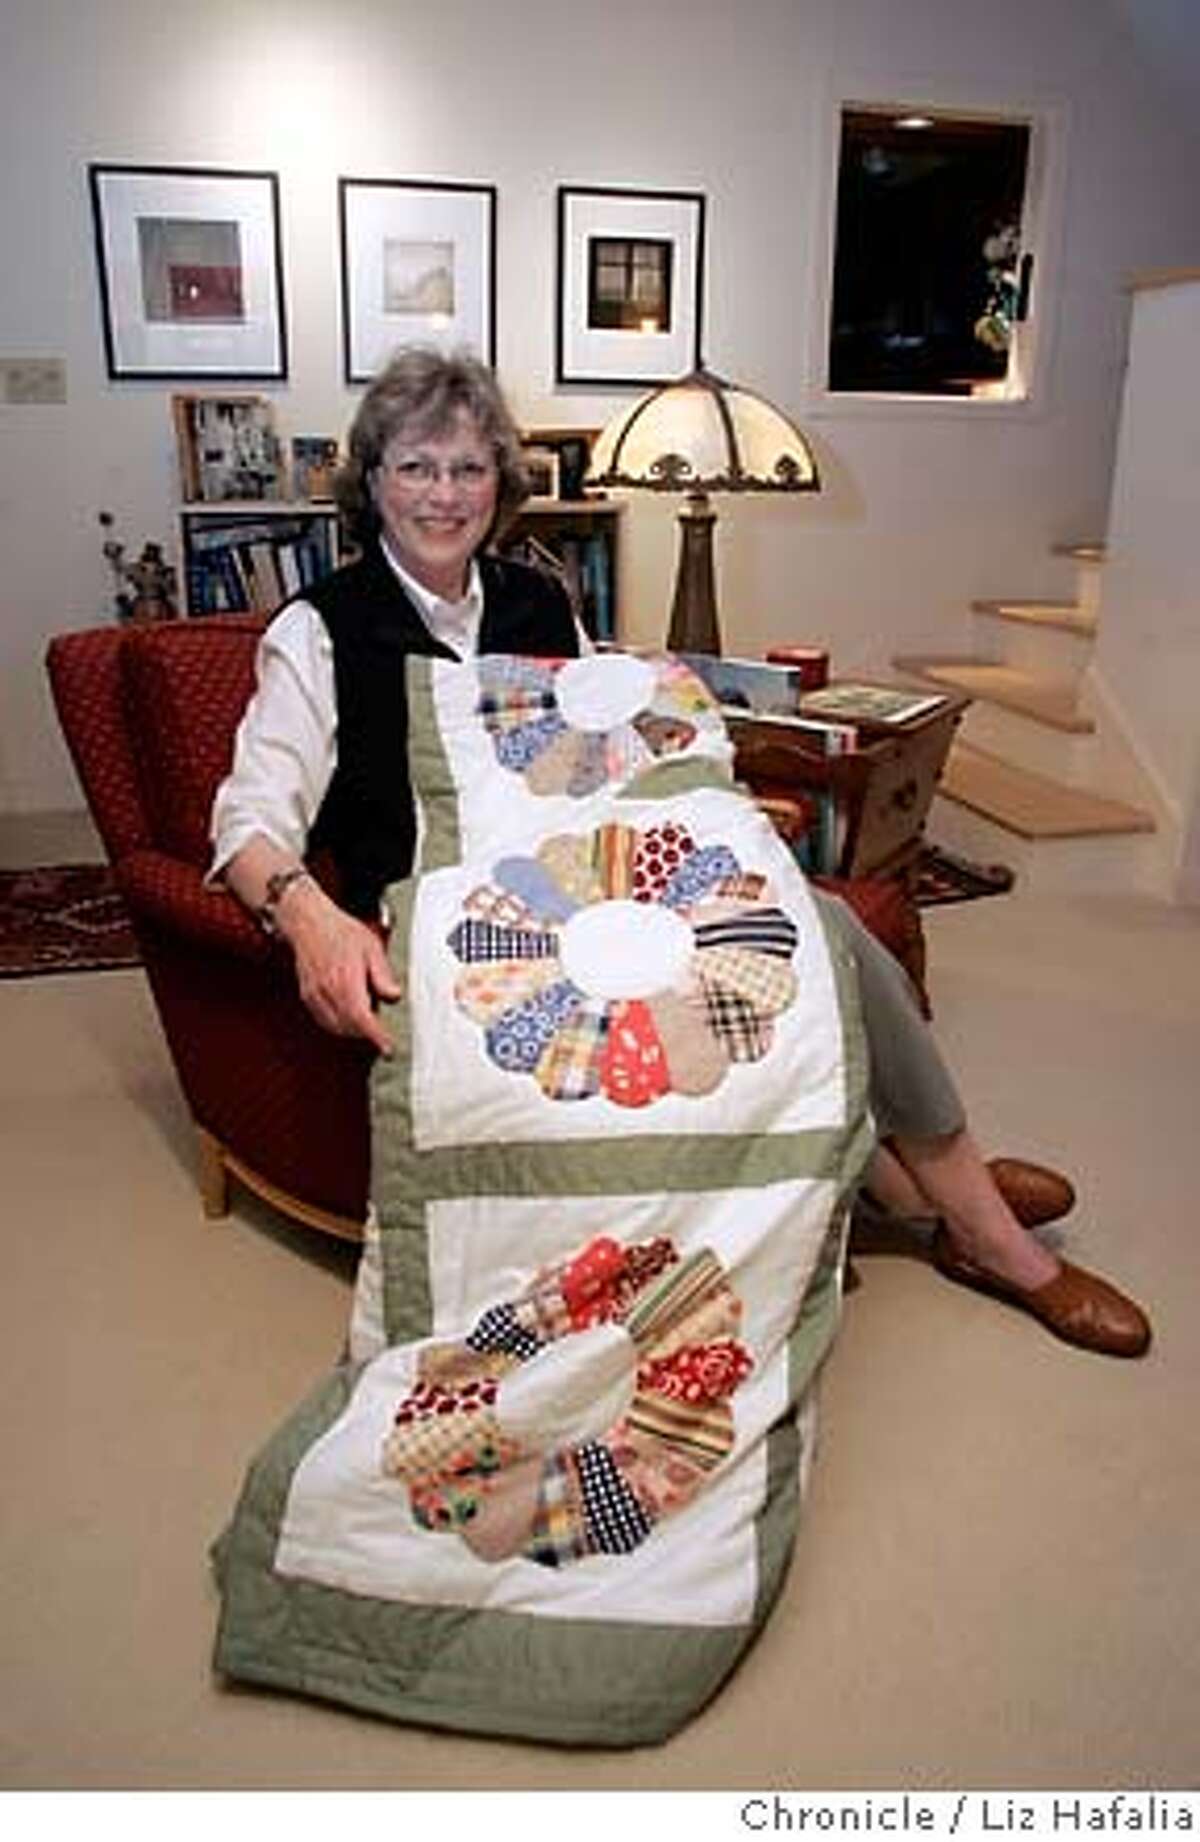 LESSONS_QUILTS14_047_LH_.JPG Writer Cynthia Overbeck Bix has written an essay about a quilt that her grandmother began which she finally finished 60 years later. Photographed by Liz Hafalia/BERKELEY/3/6/07 **Cynthia Overbeck Bix cq �2007, San Francisco Chronicle/ Liz Hafalia MANDATORY CREDIT FOR PHOTOG AND SAN FRANCISCO CHRONICLE. NO SALES- MAGS OUT.